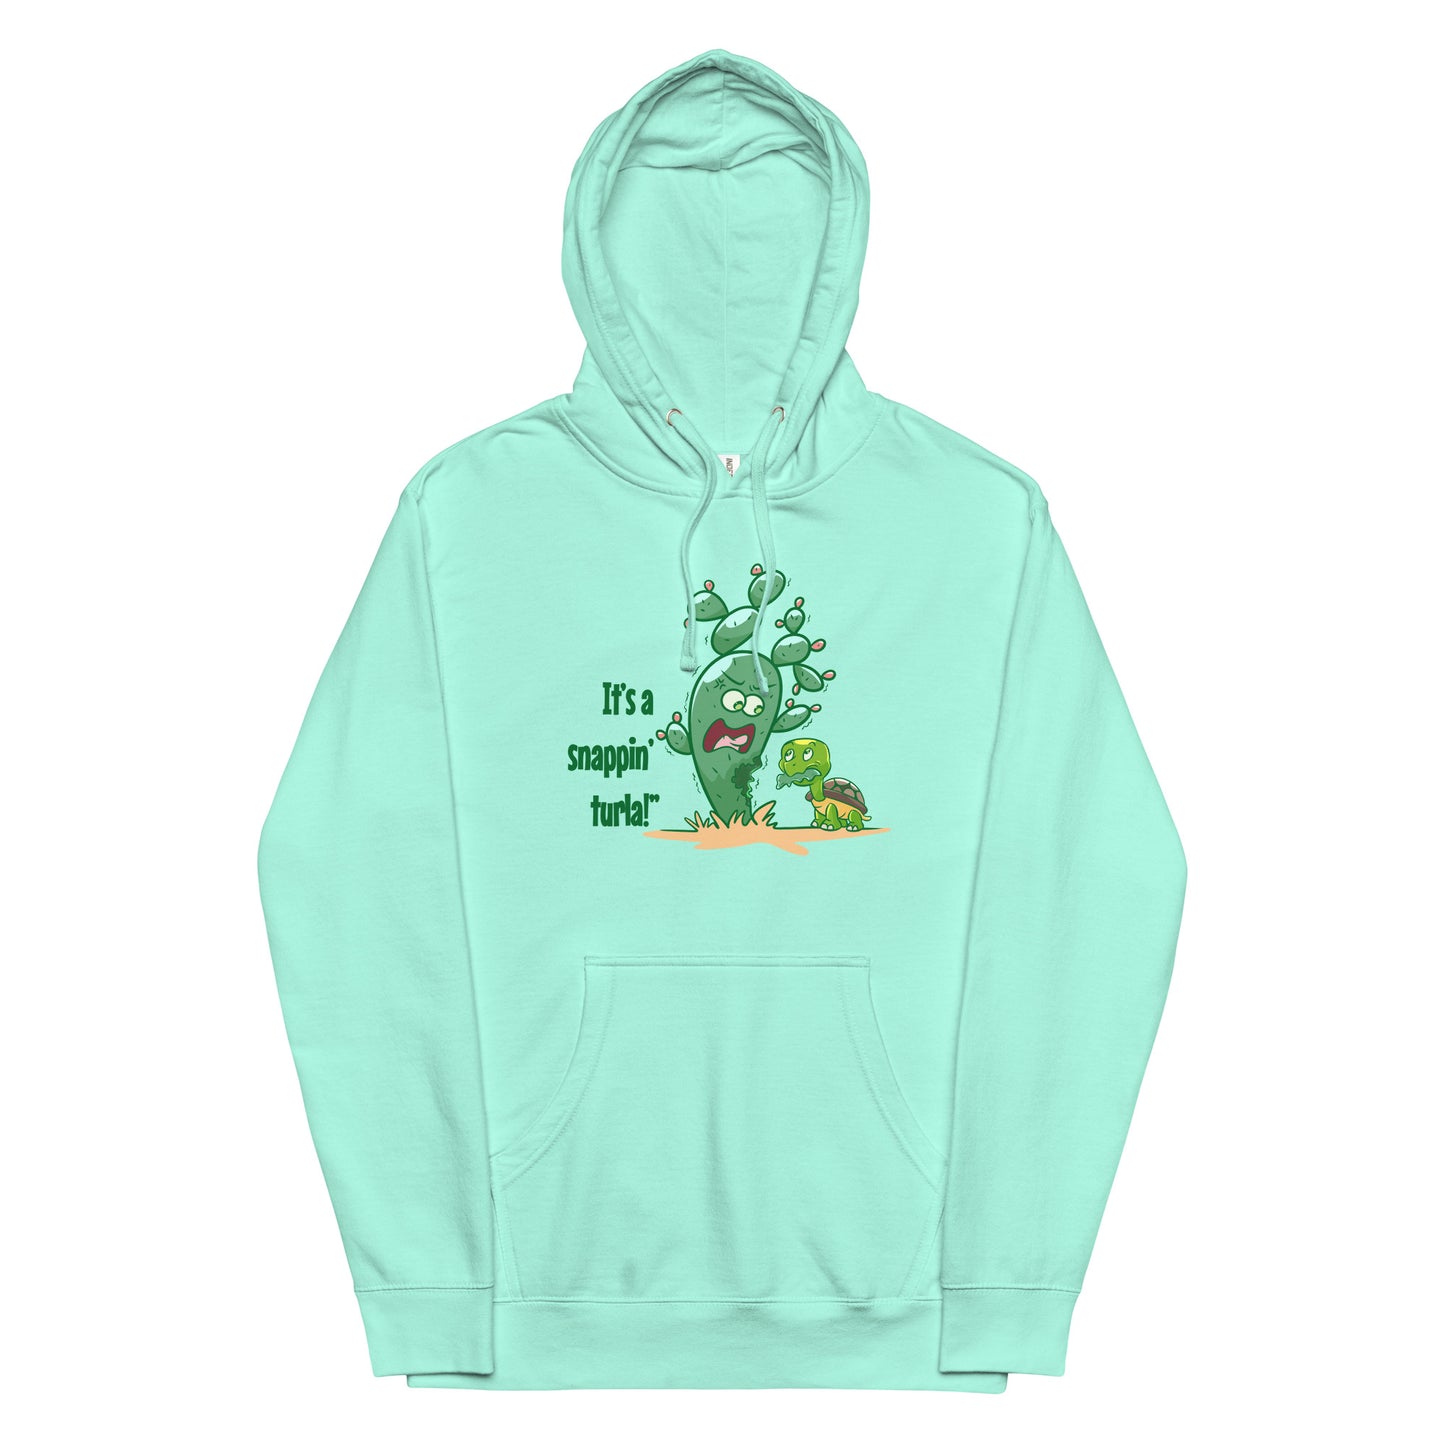 It's a snappin' turla hoodie